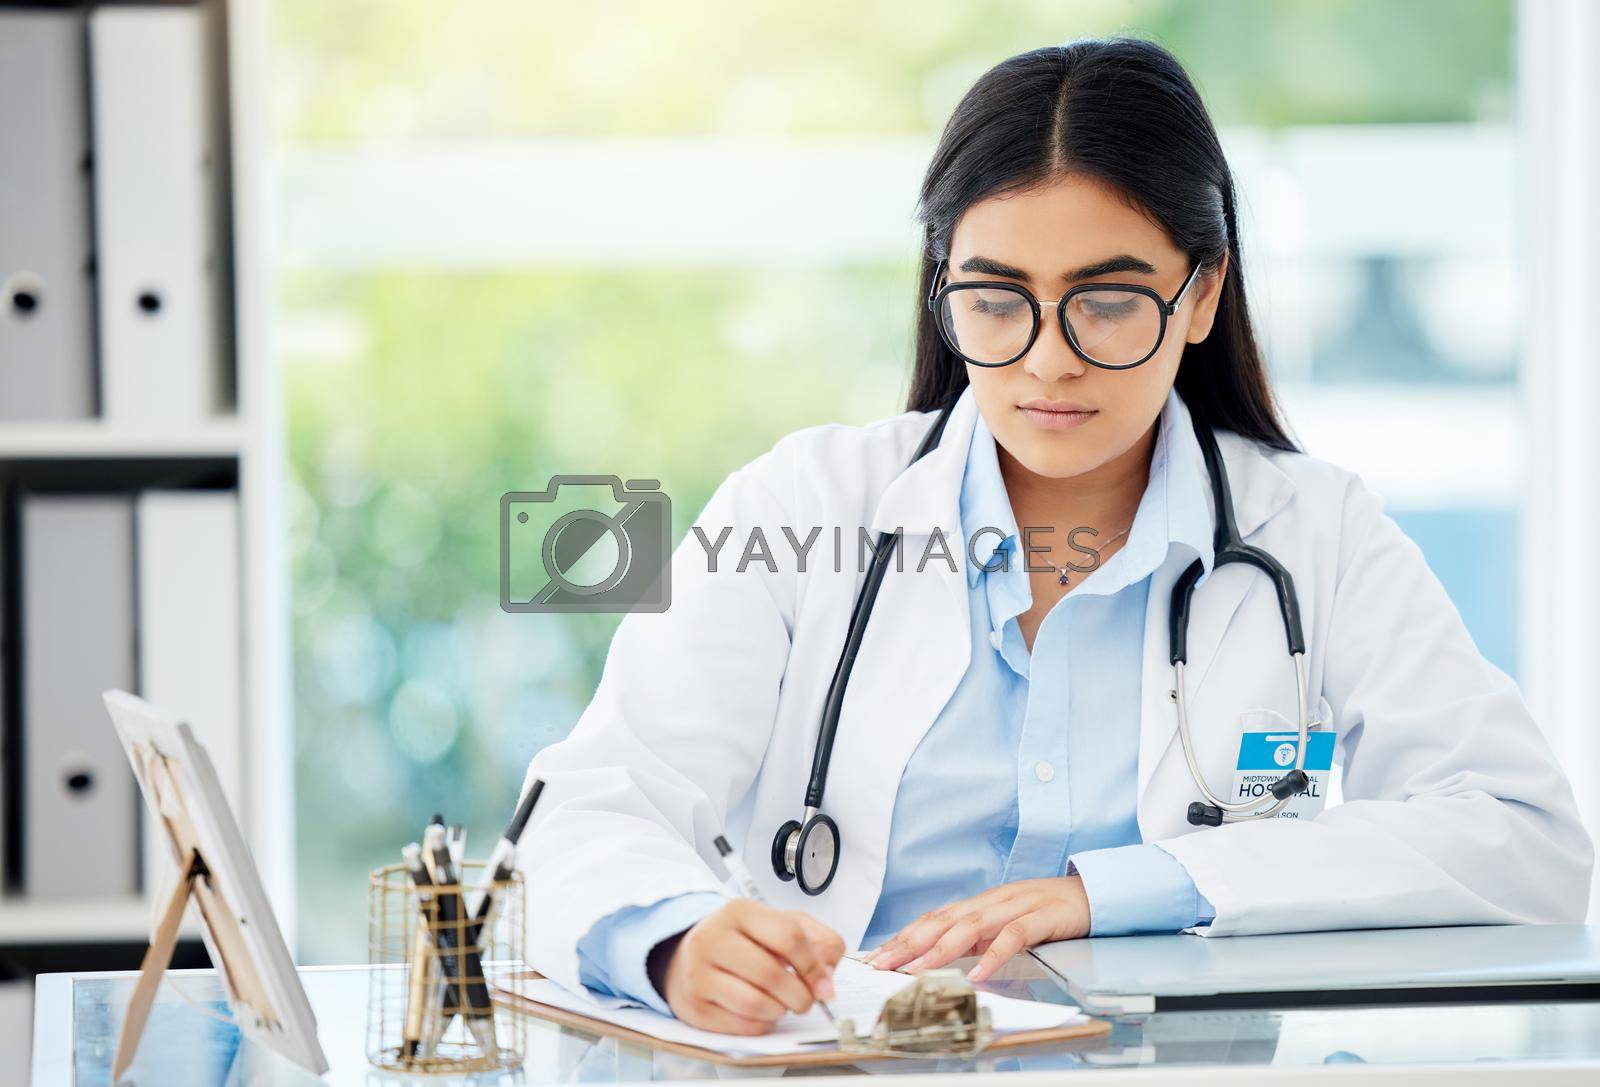 Doctor, insurance and medical of a woman filling out patient history for diagnosis at the hospital. Healthcare worker or nurse writing on paper with clipboard for health and wellness at the office